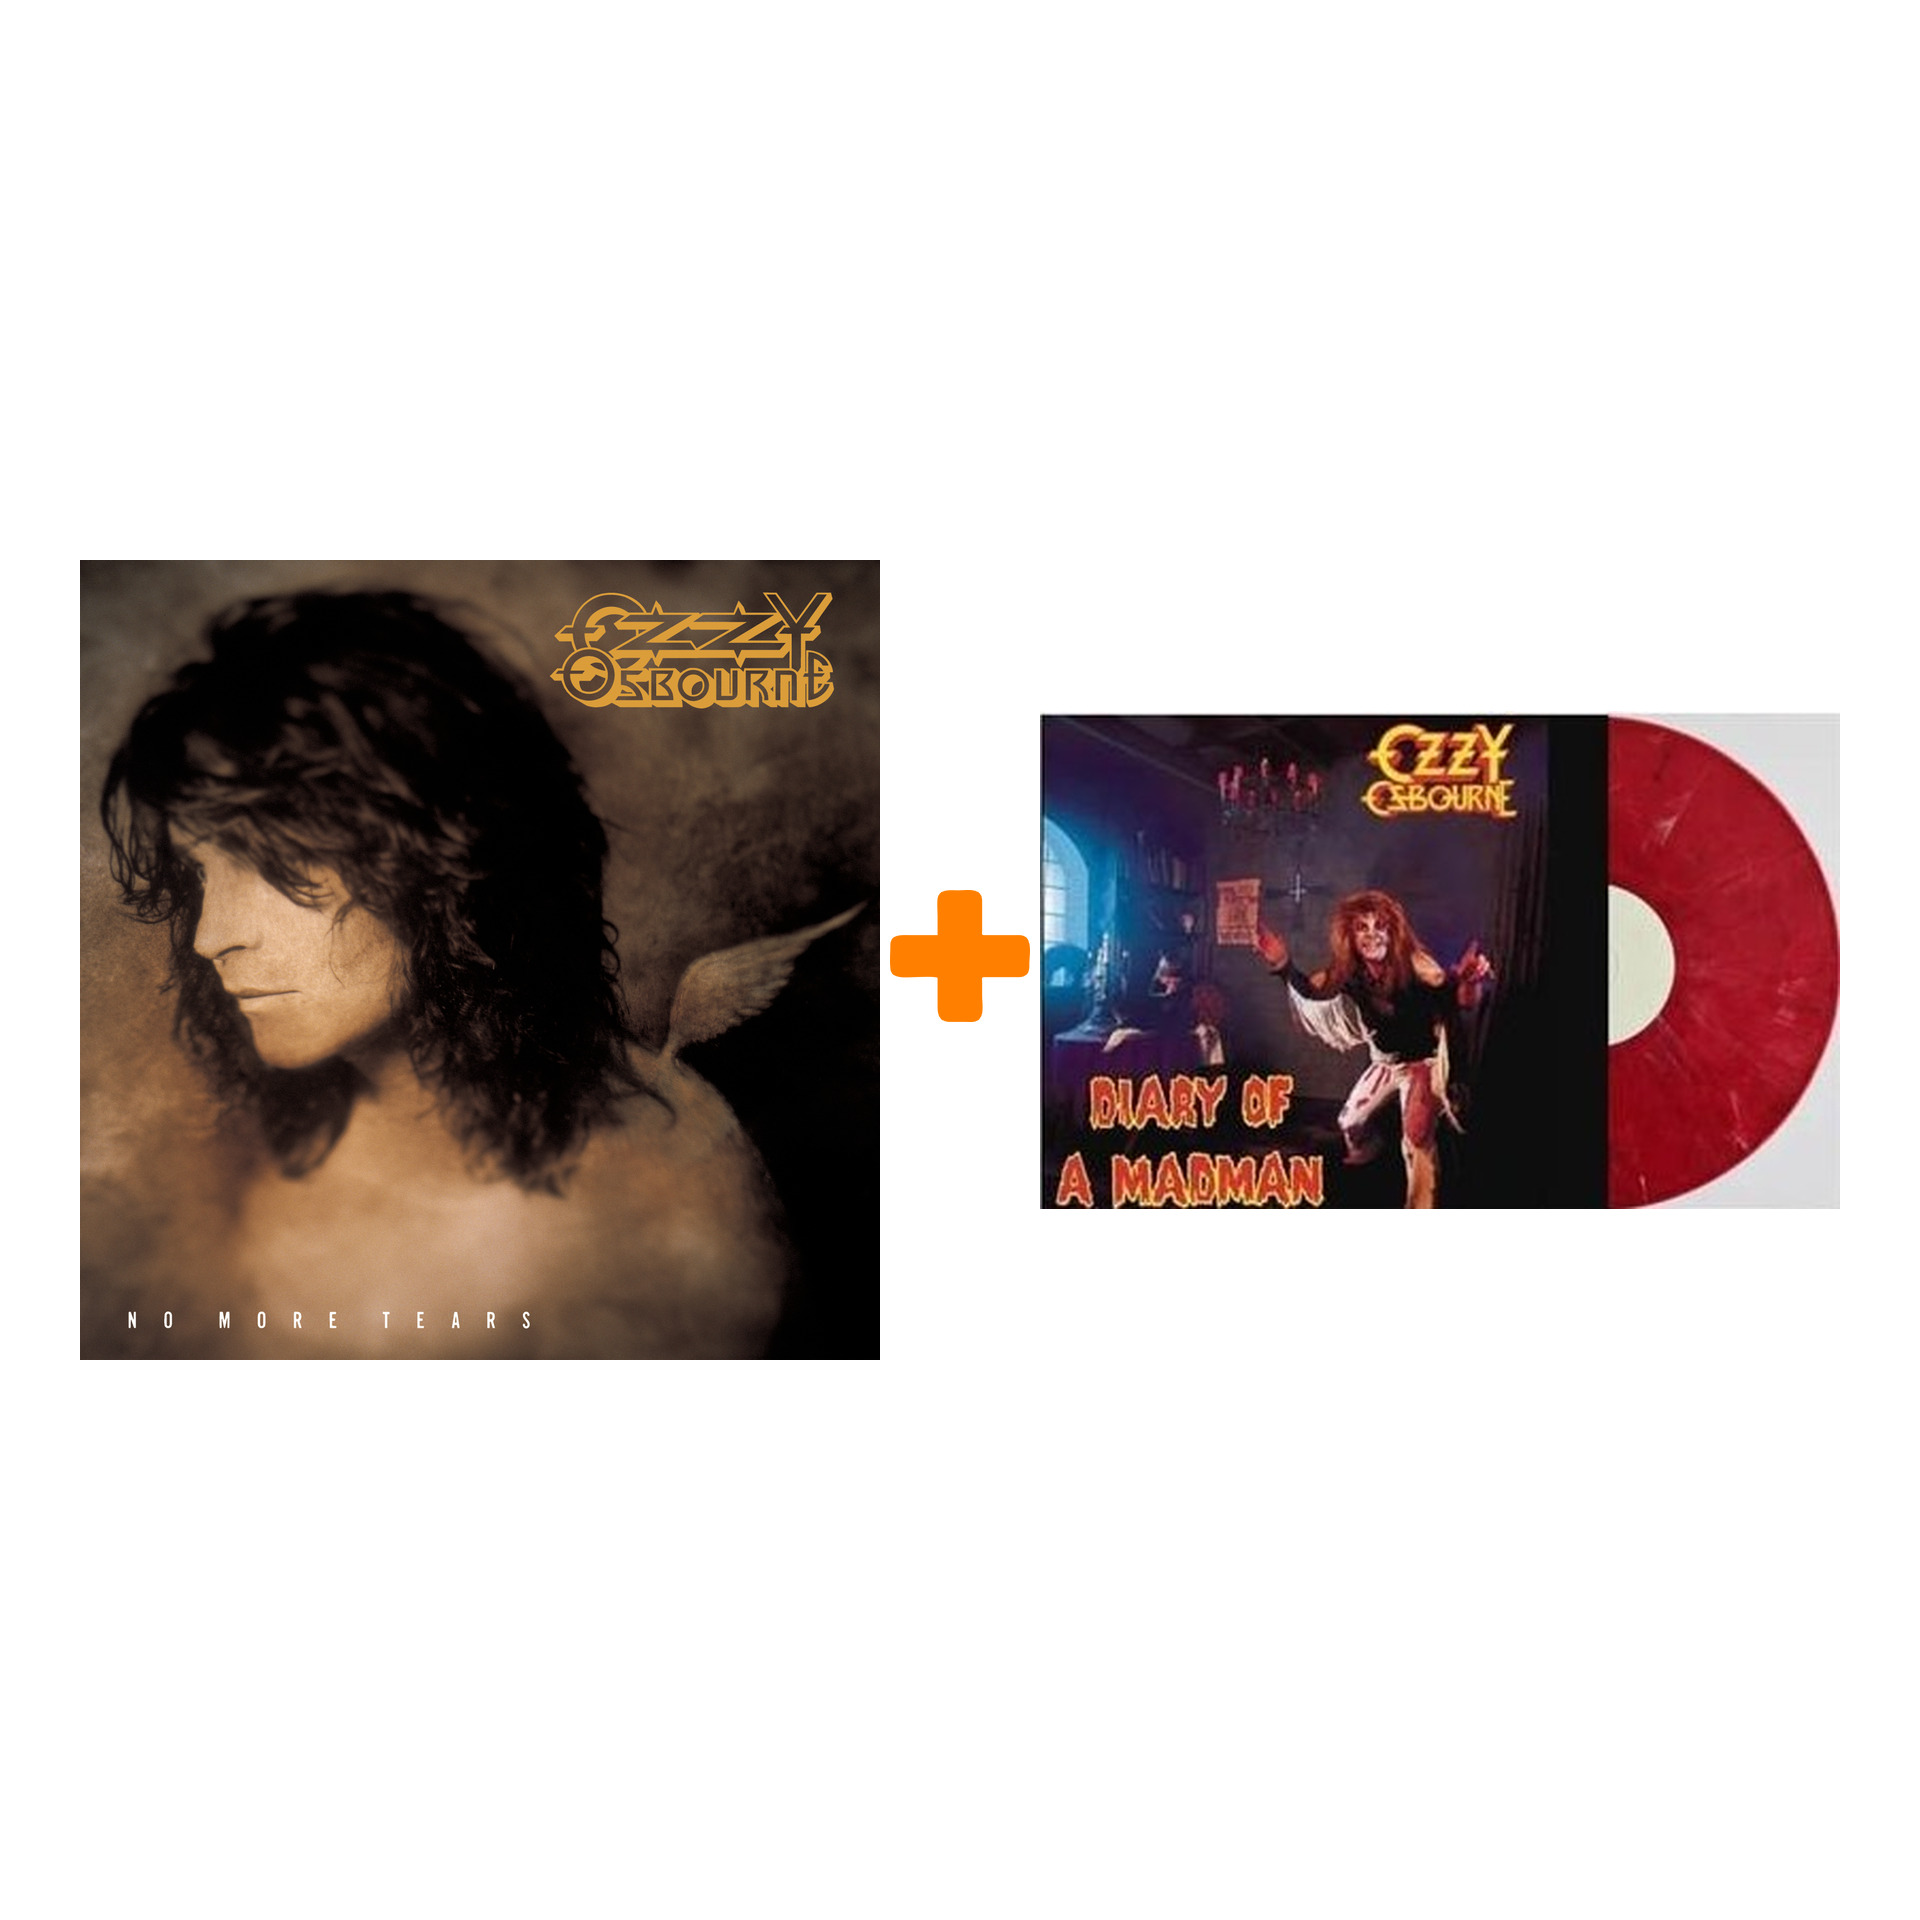 Ozzy Osbourne – Diary Of A Madman 40th Anniversary Marbled Vinyl (LP) + No More Tears. 30th Anniversary (2 LP)